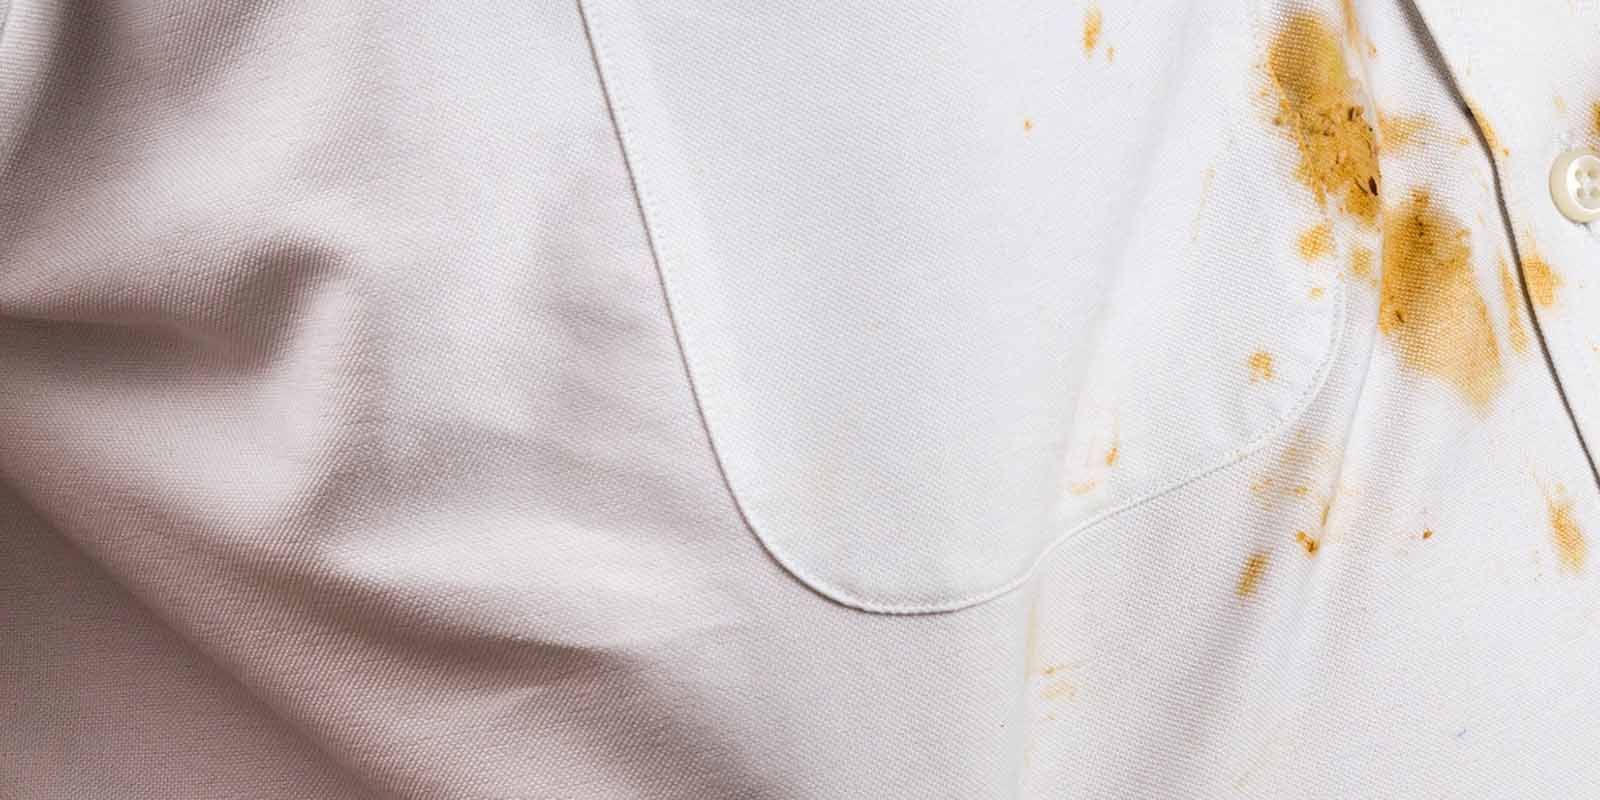 Tips for Removing Stains in Fabrics